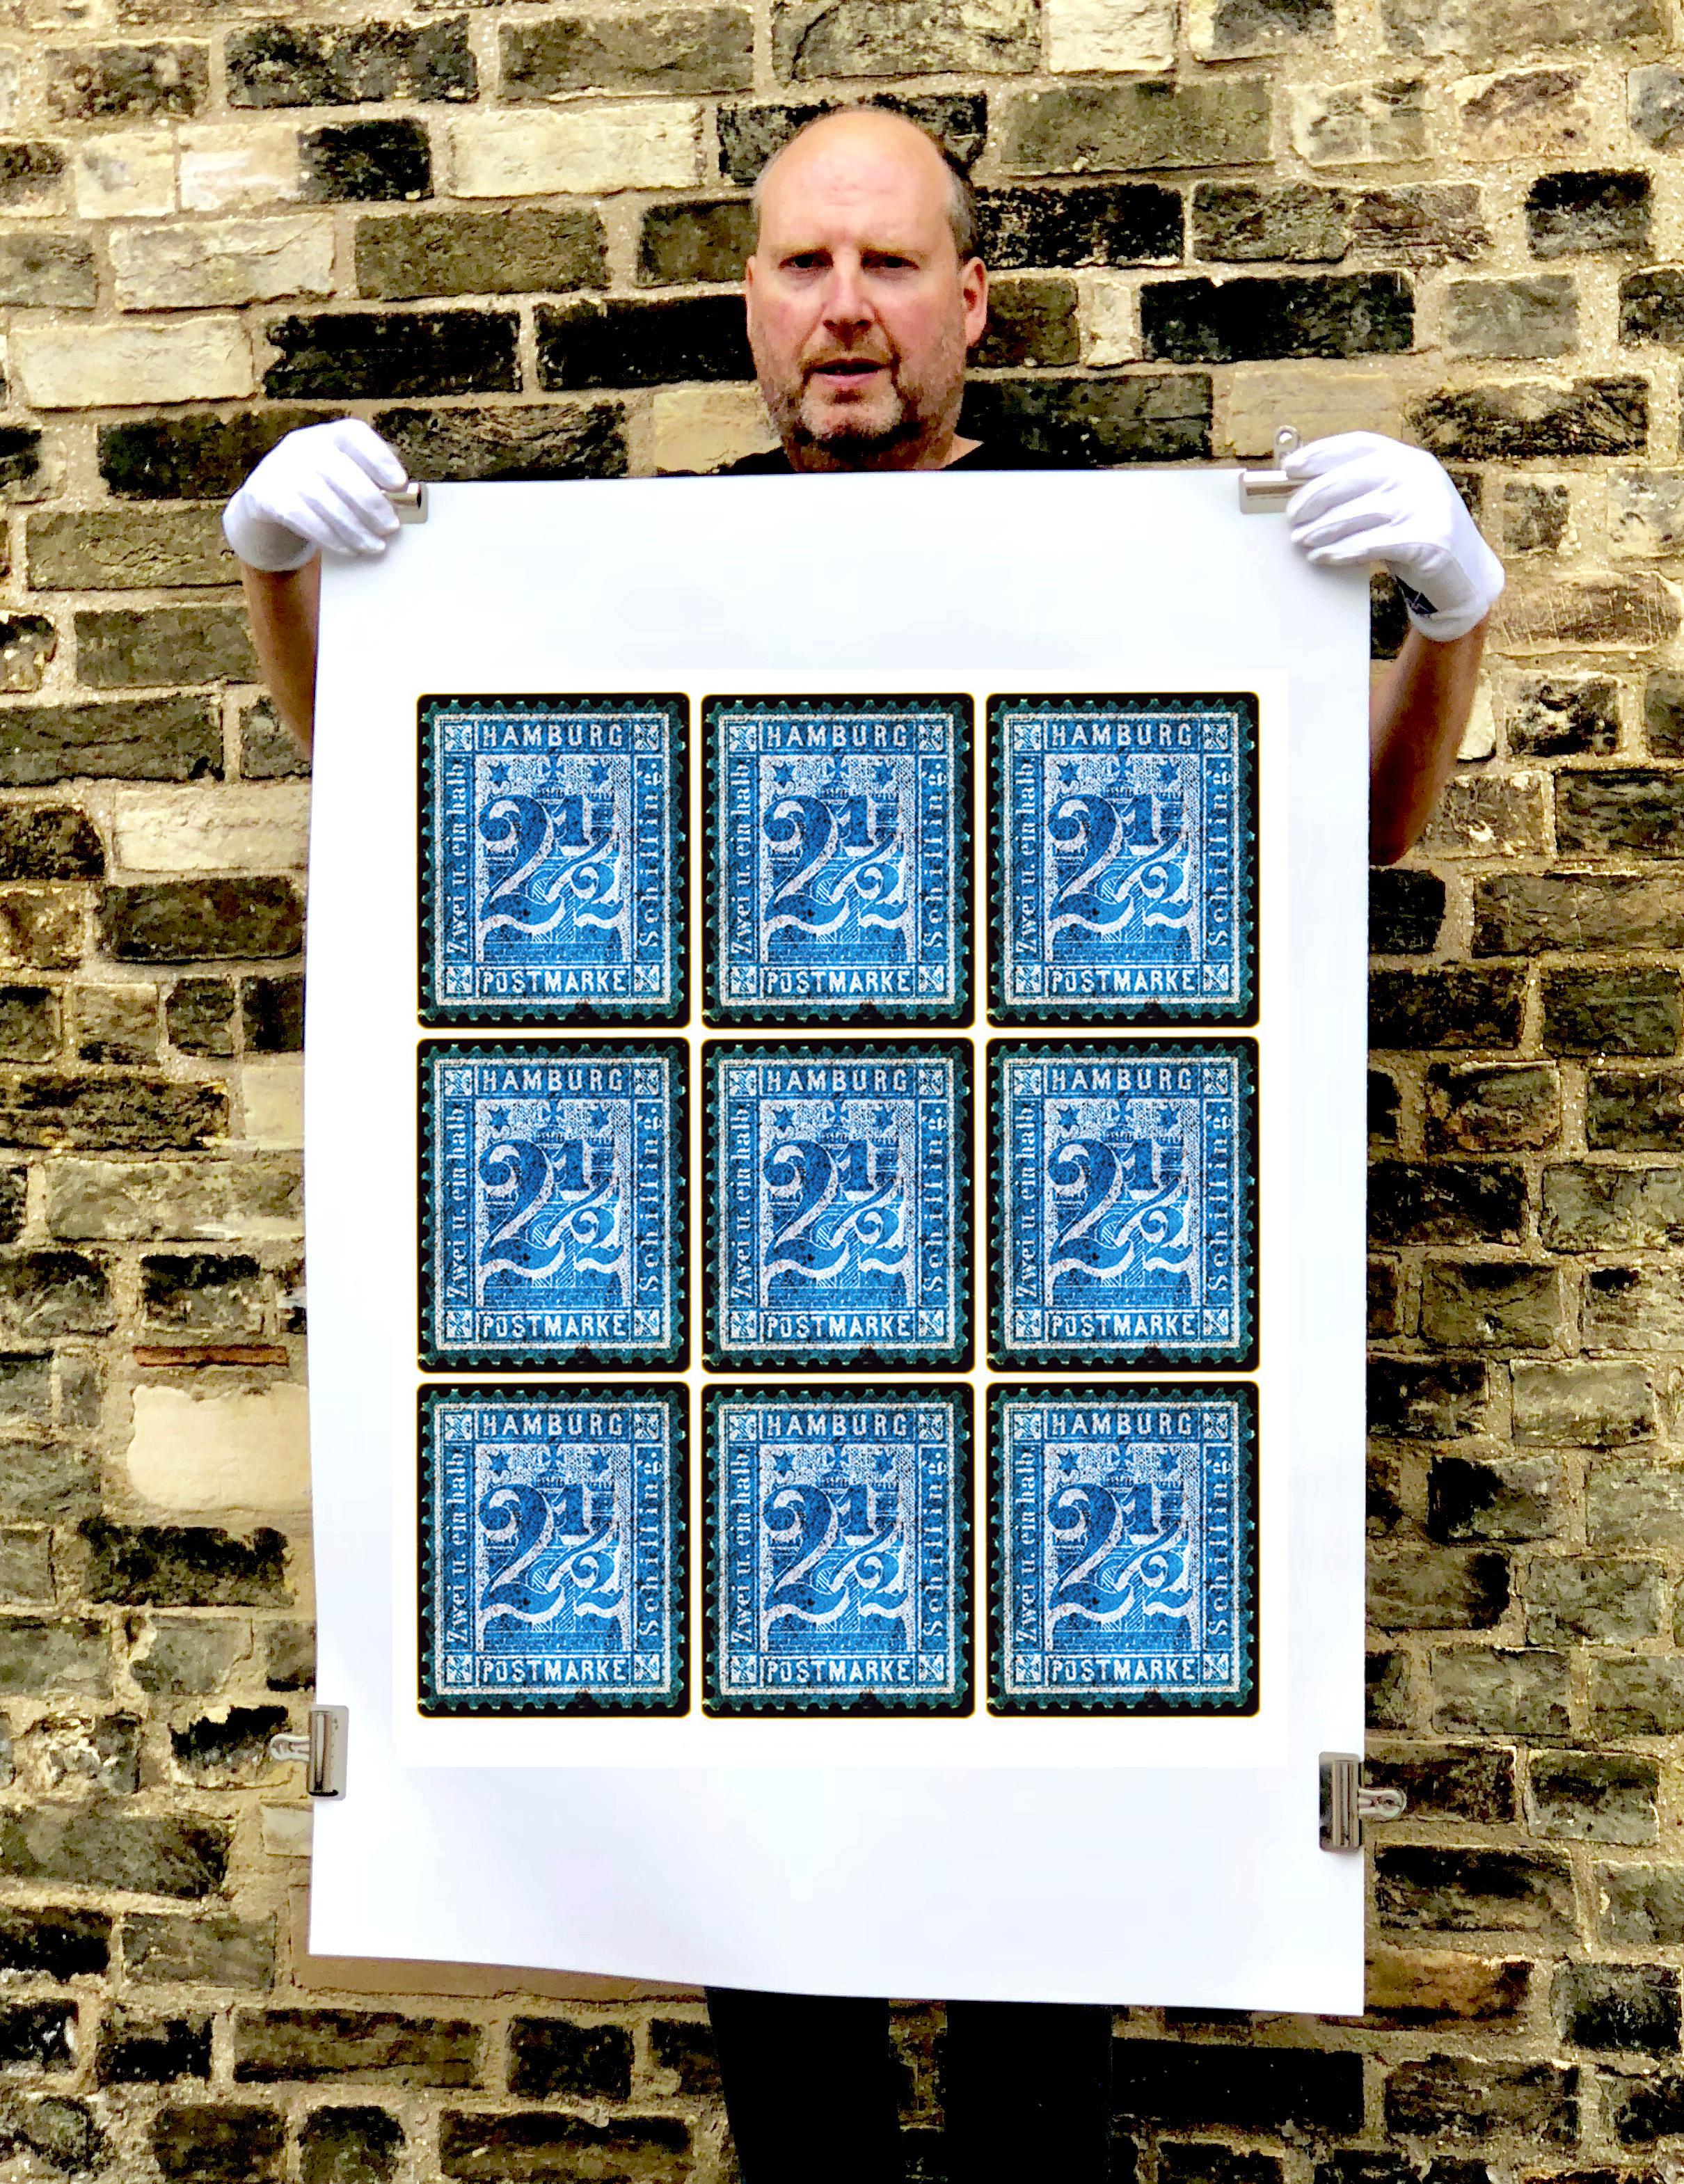 Stamp Collection, 1864 Hamburg (Blue Mosaic German Stamps) - Pop Art Color Photo - Print by Heidler & Heeps